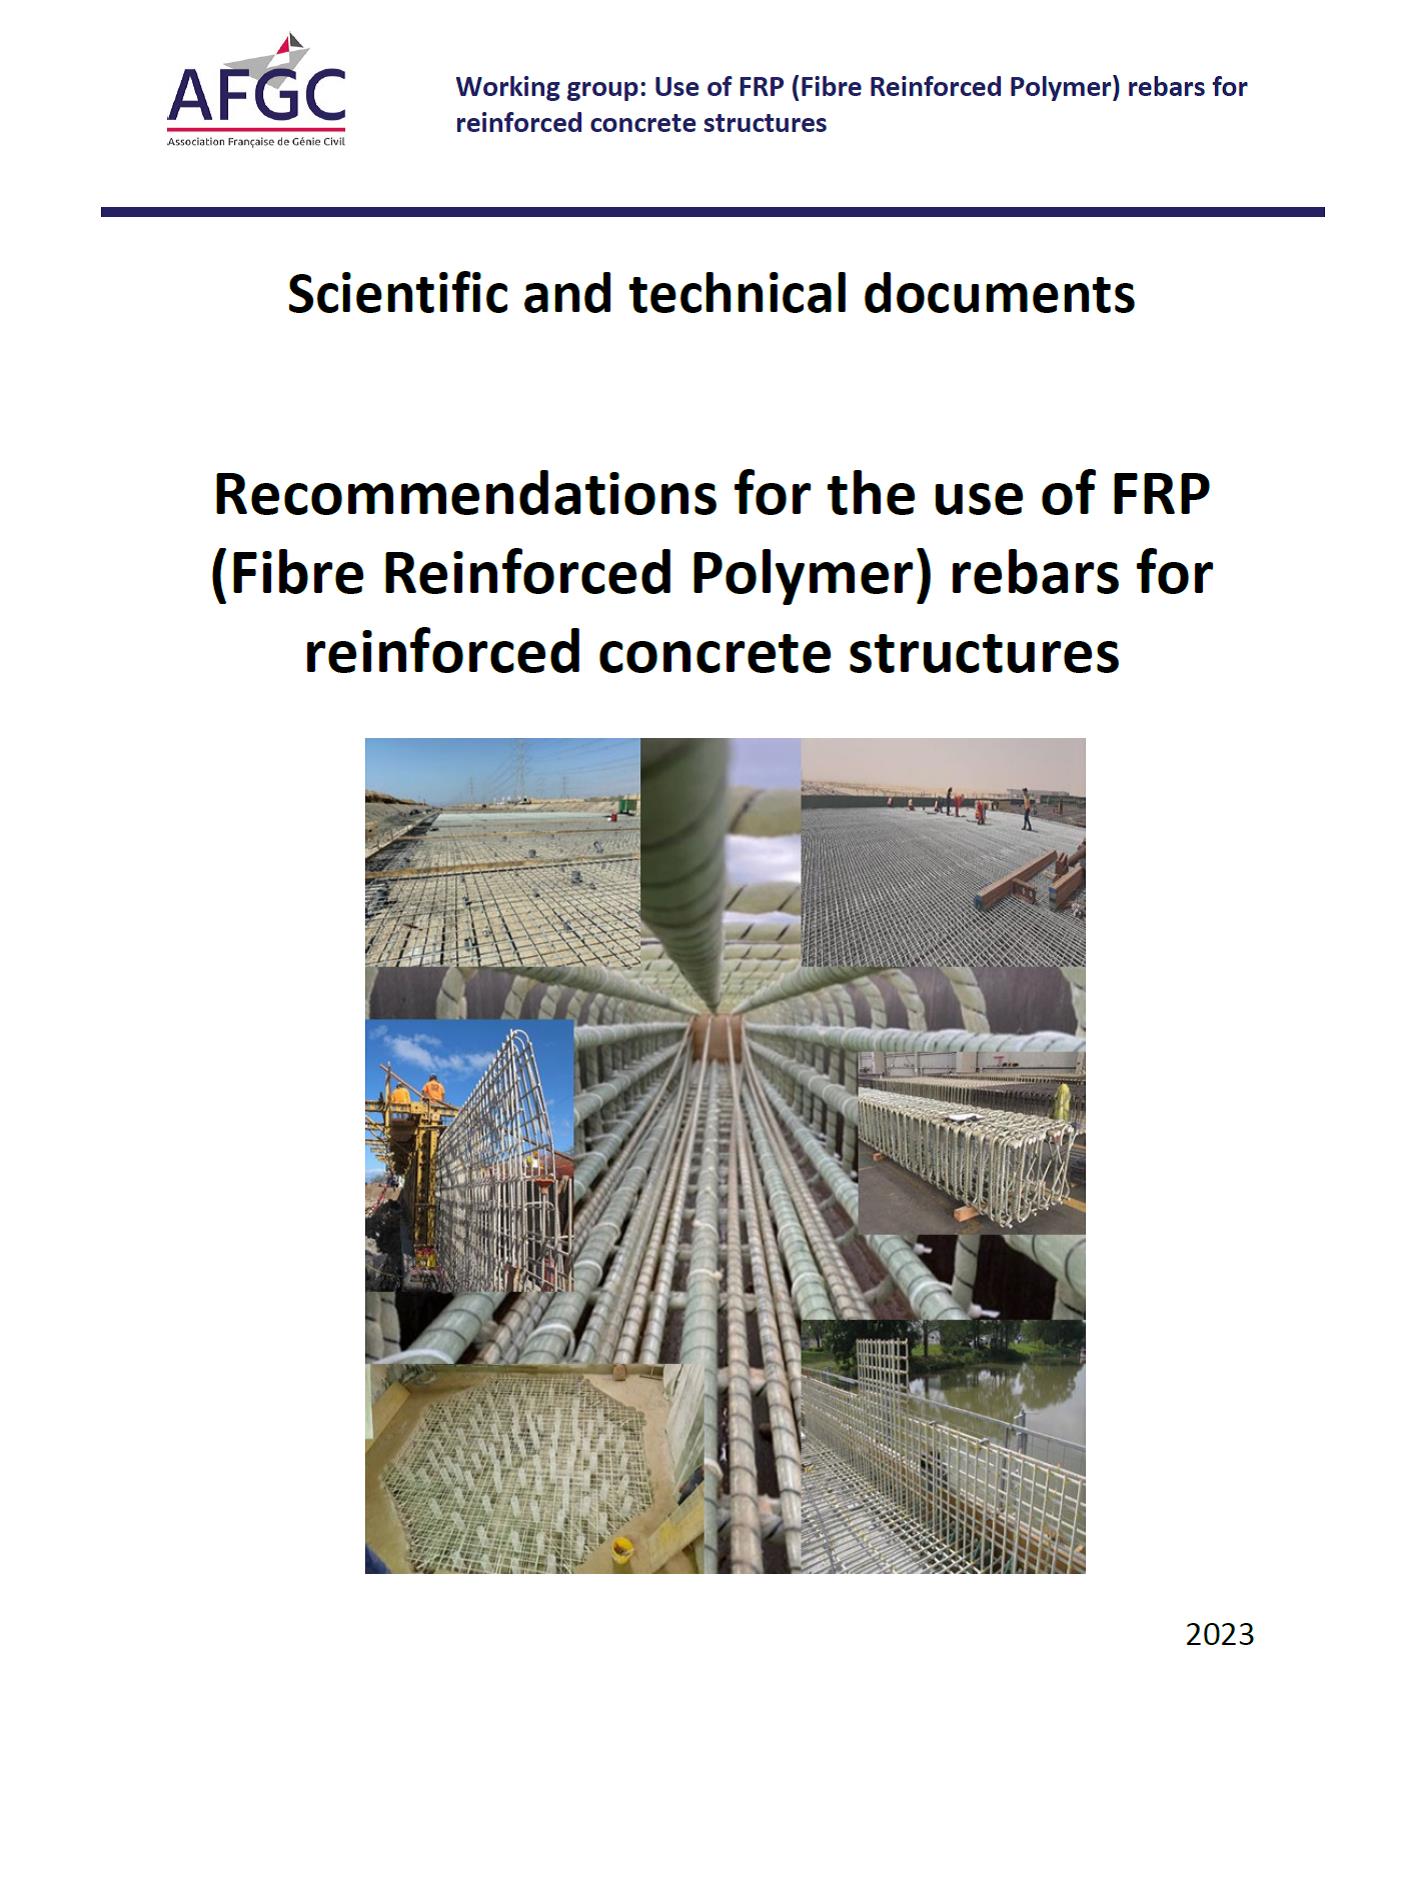 Recommendations for the use of FRP (Fibre Reinforced Polymer) rebars for reinforced concrete structures